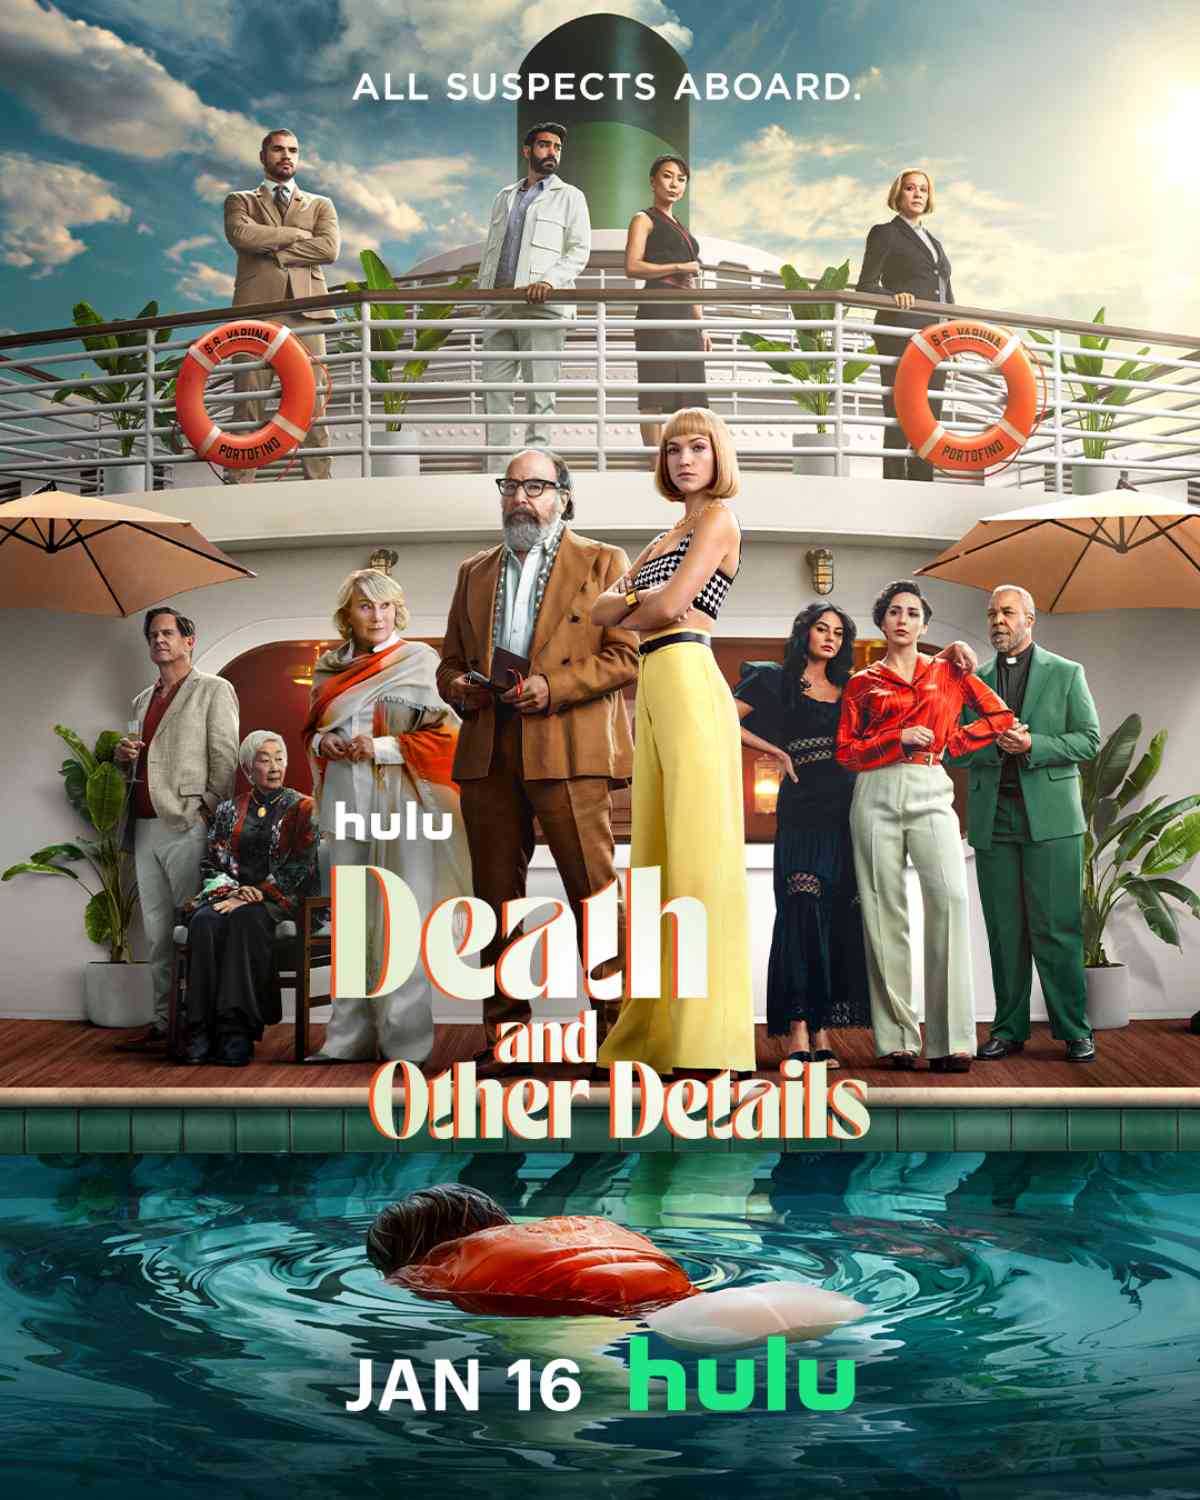 Death and Other Details Trailer and Key Art Revealed